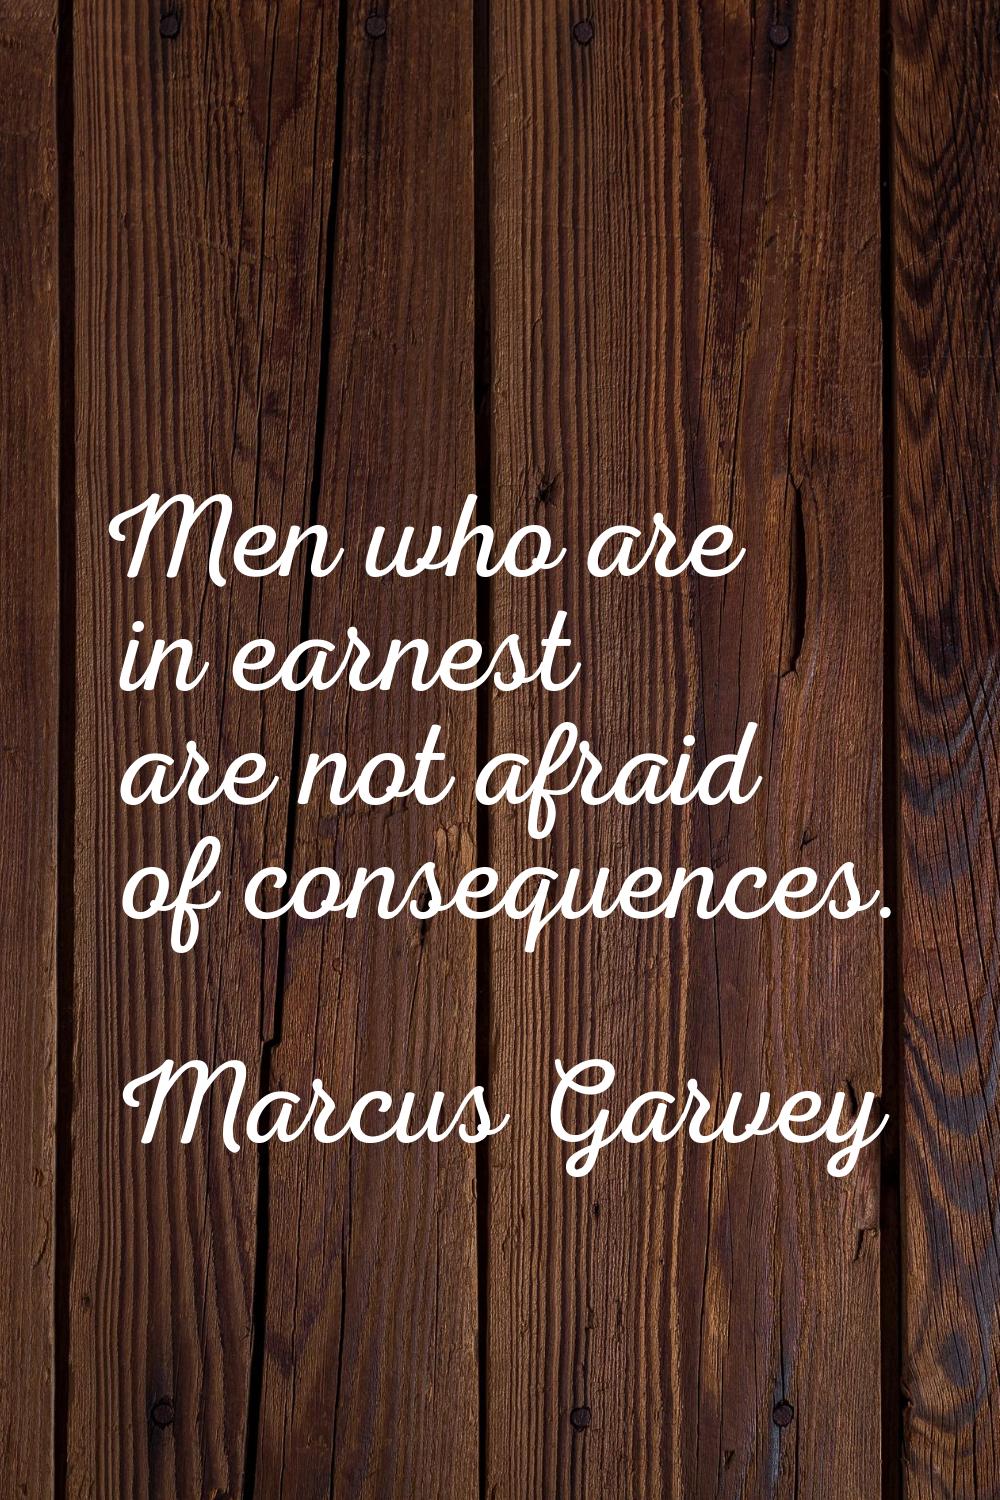 Men who are in earnest are not afraid of consequences.